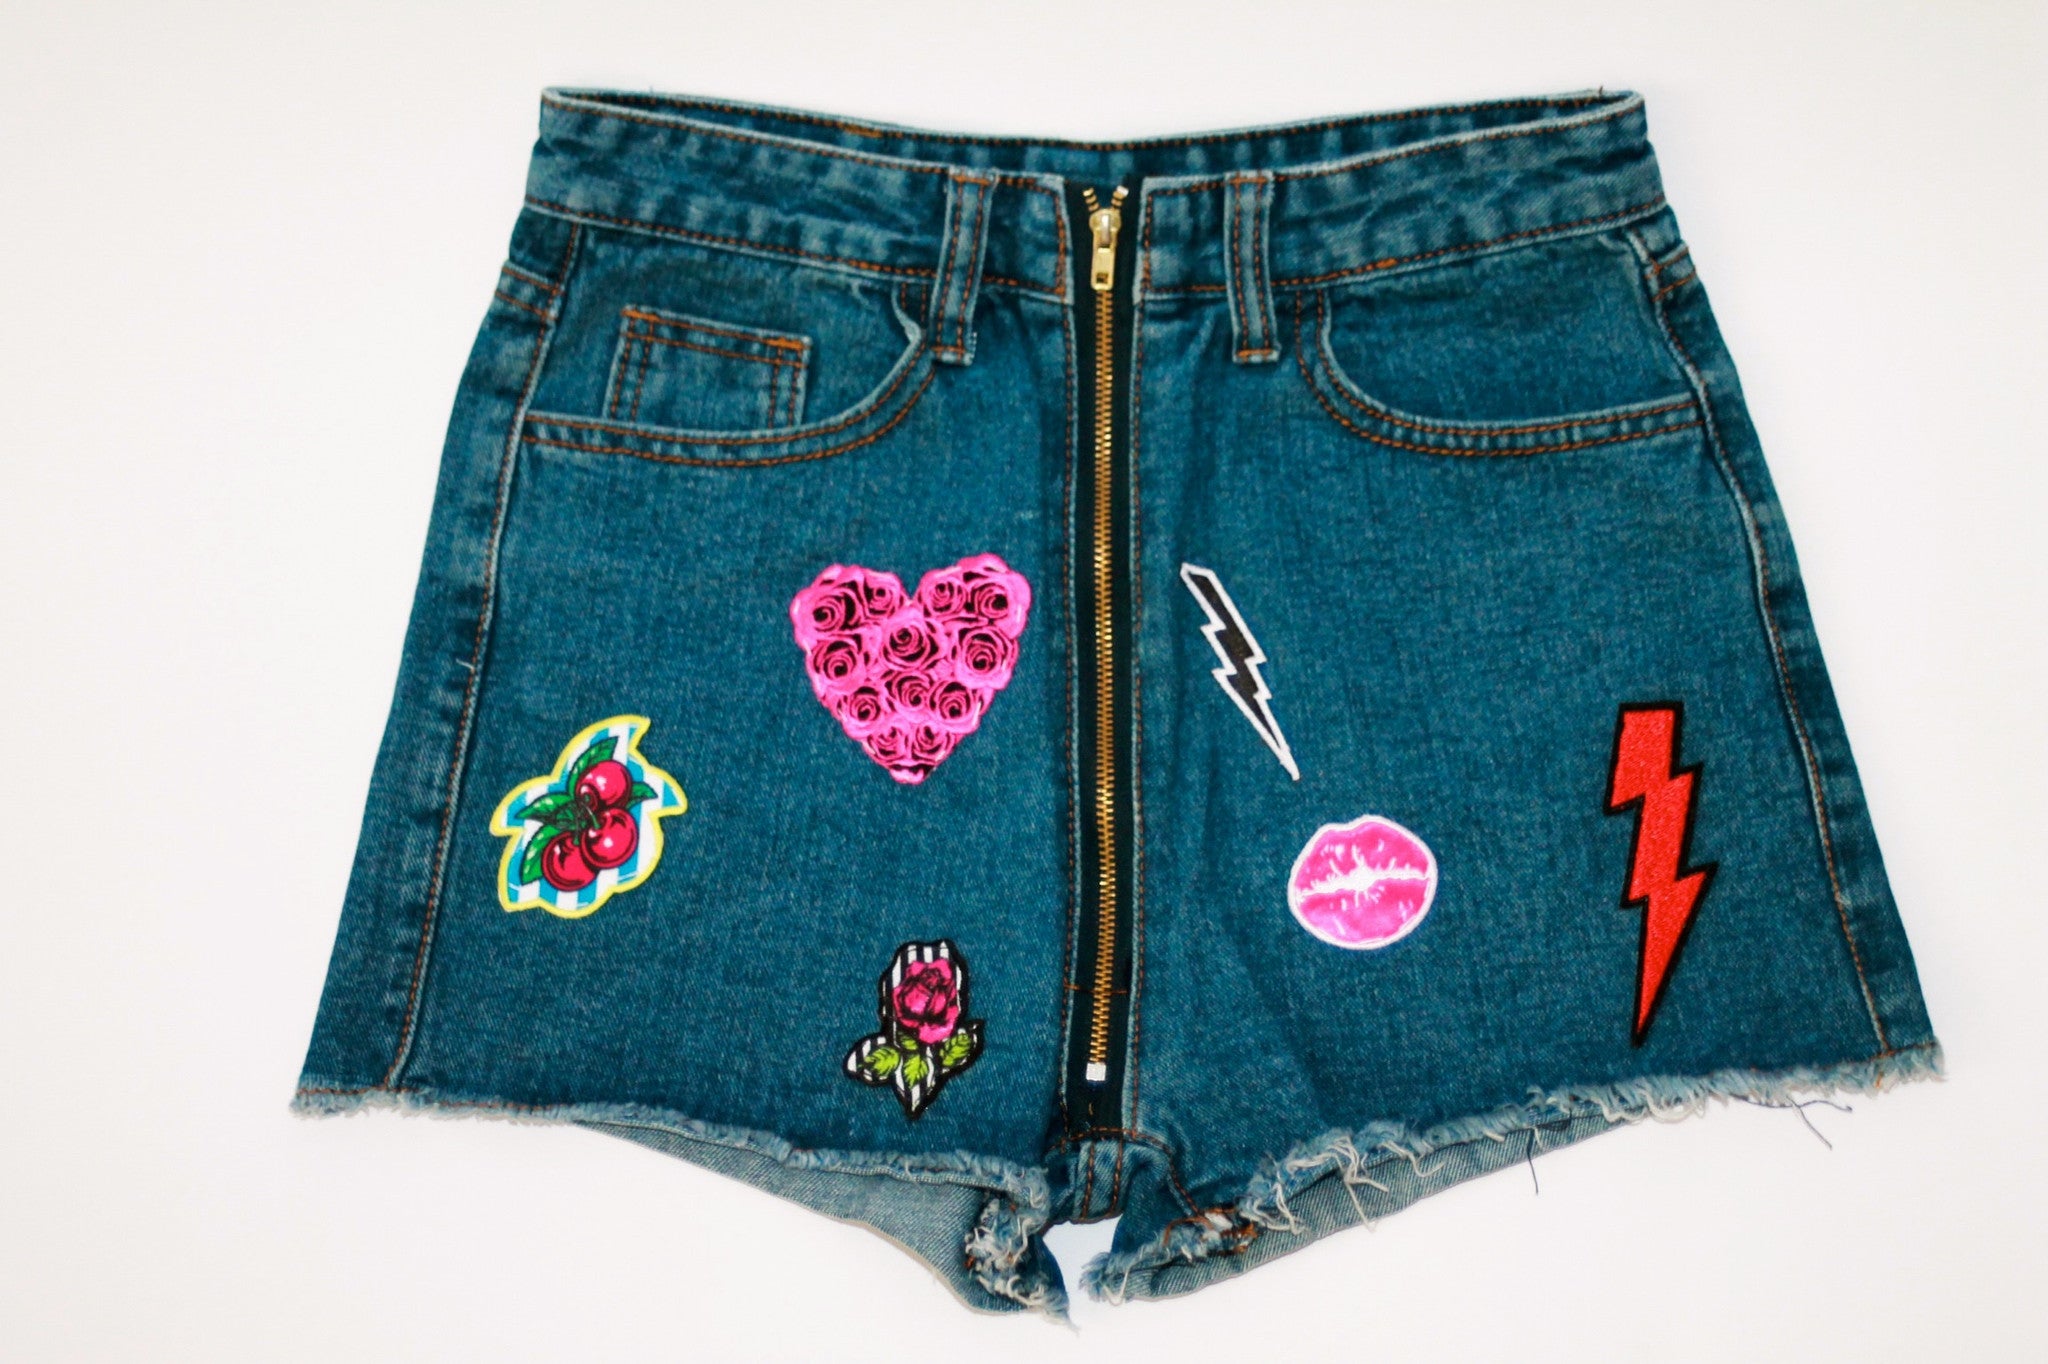 Custom 7ven x Betsey Johnson Patched Shorts #4